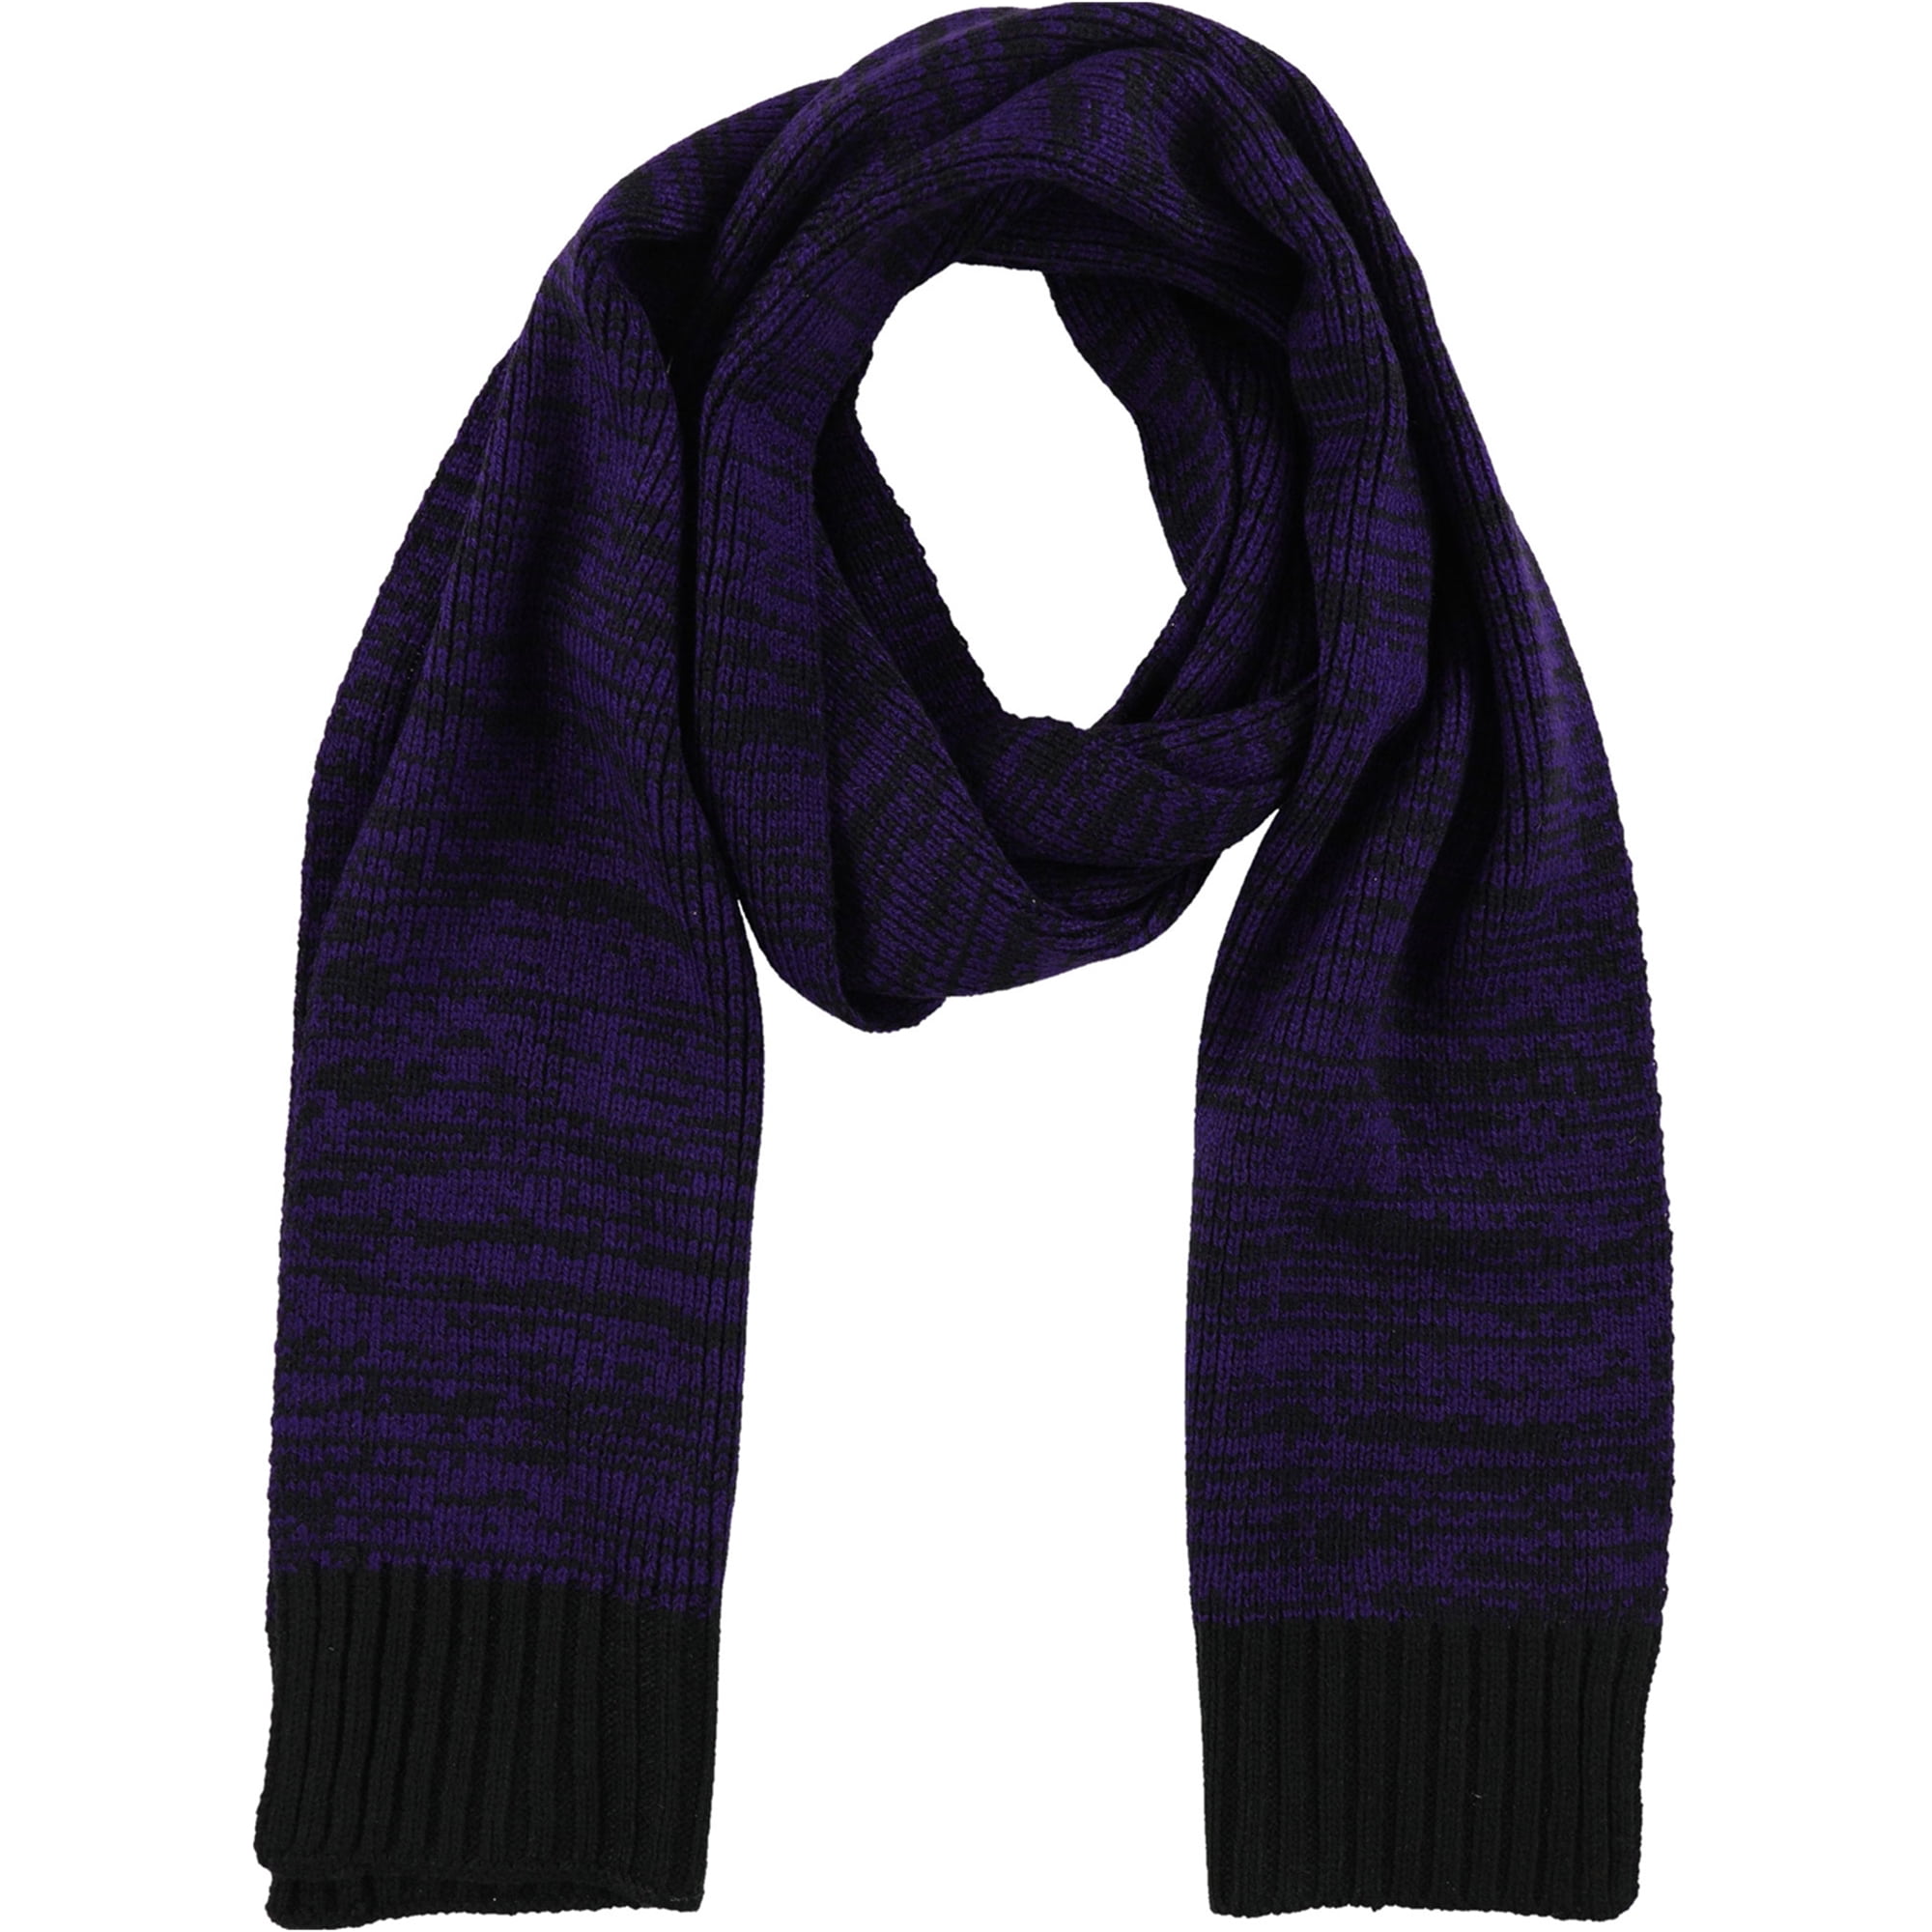 Connex Gear Mens Solid Jacquard Ribbed Winter Scarf